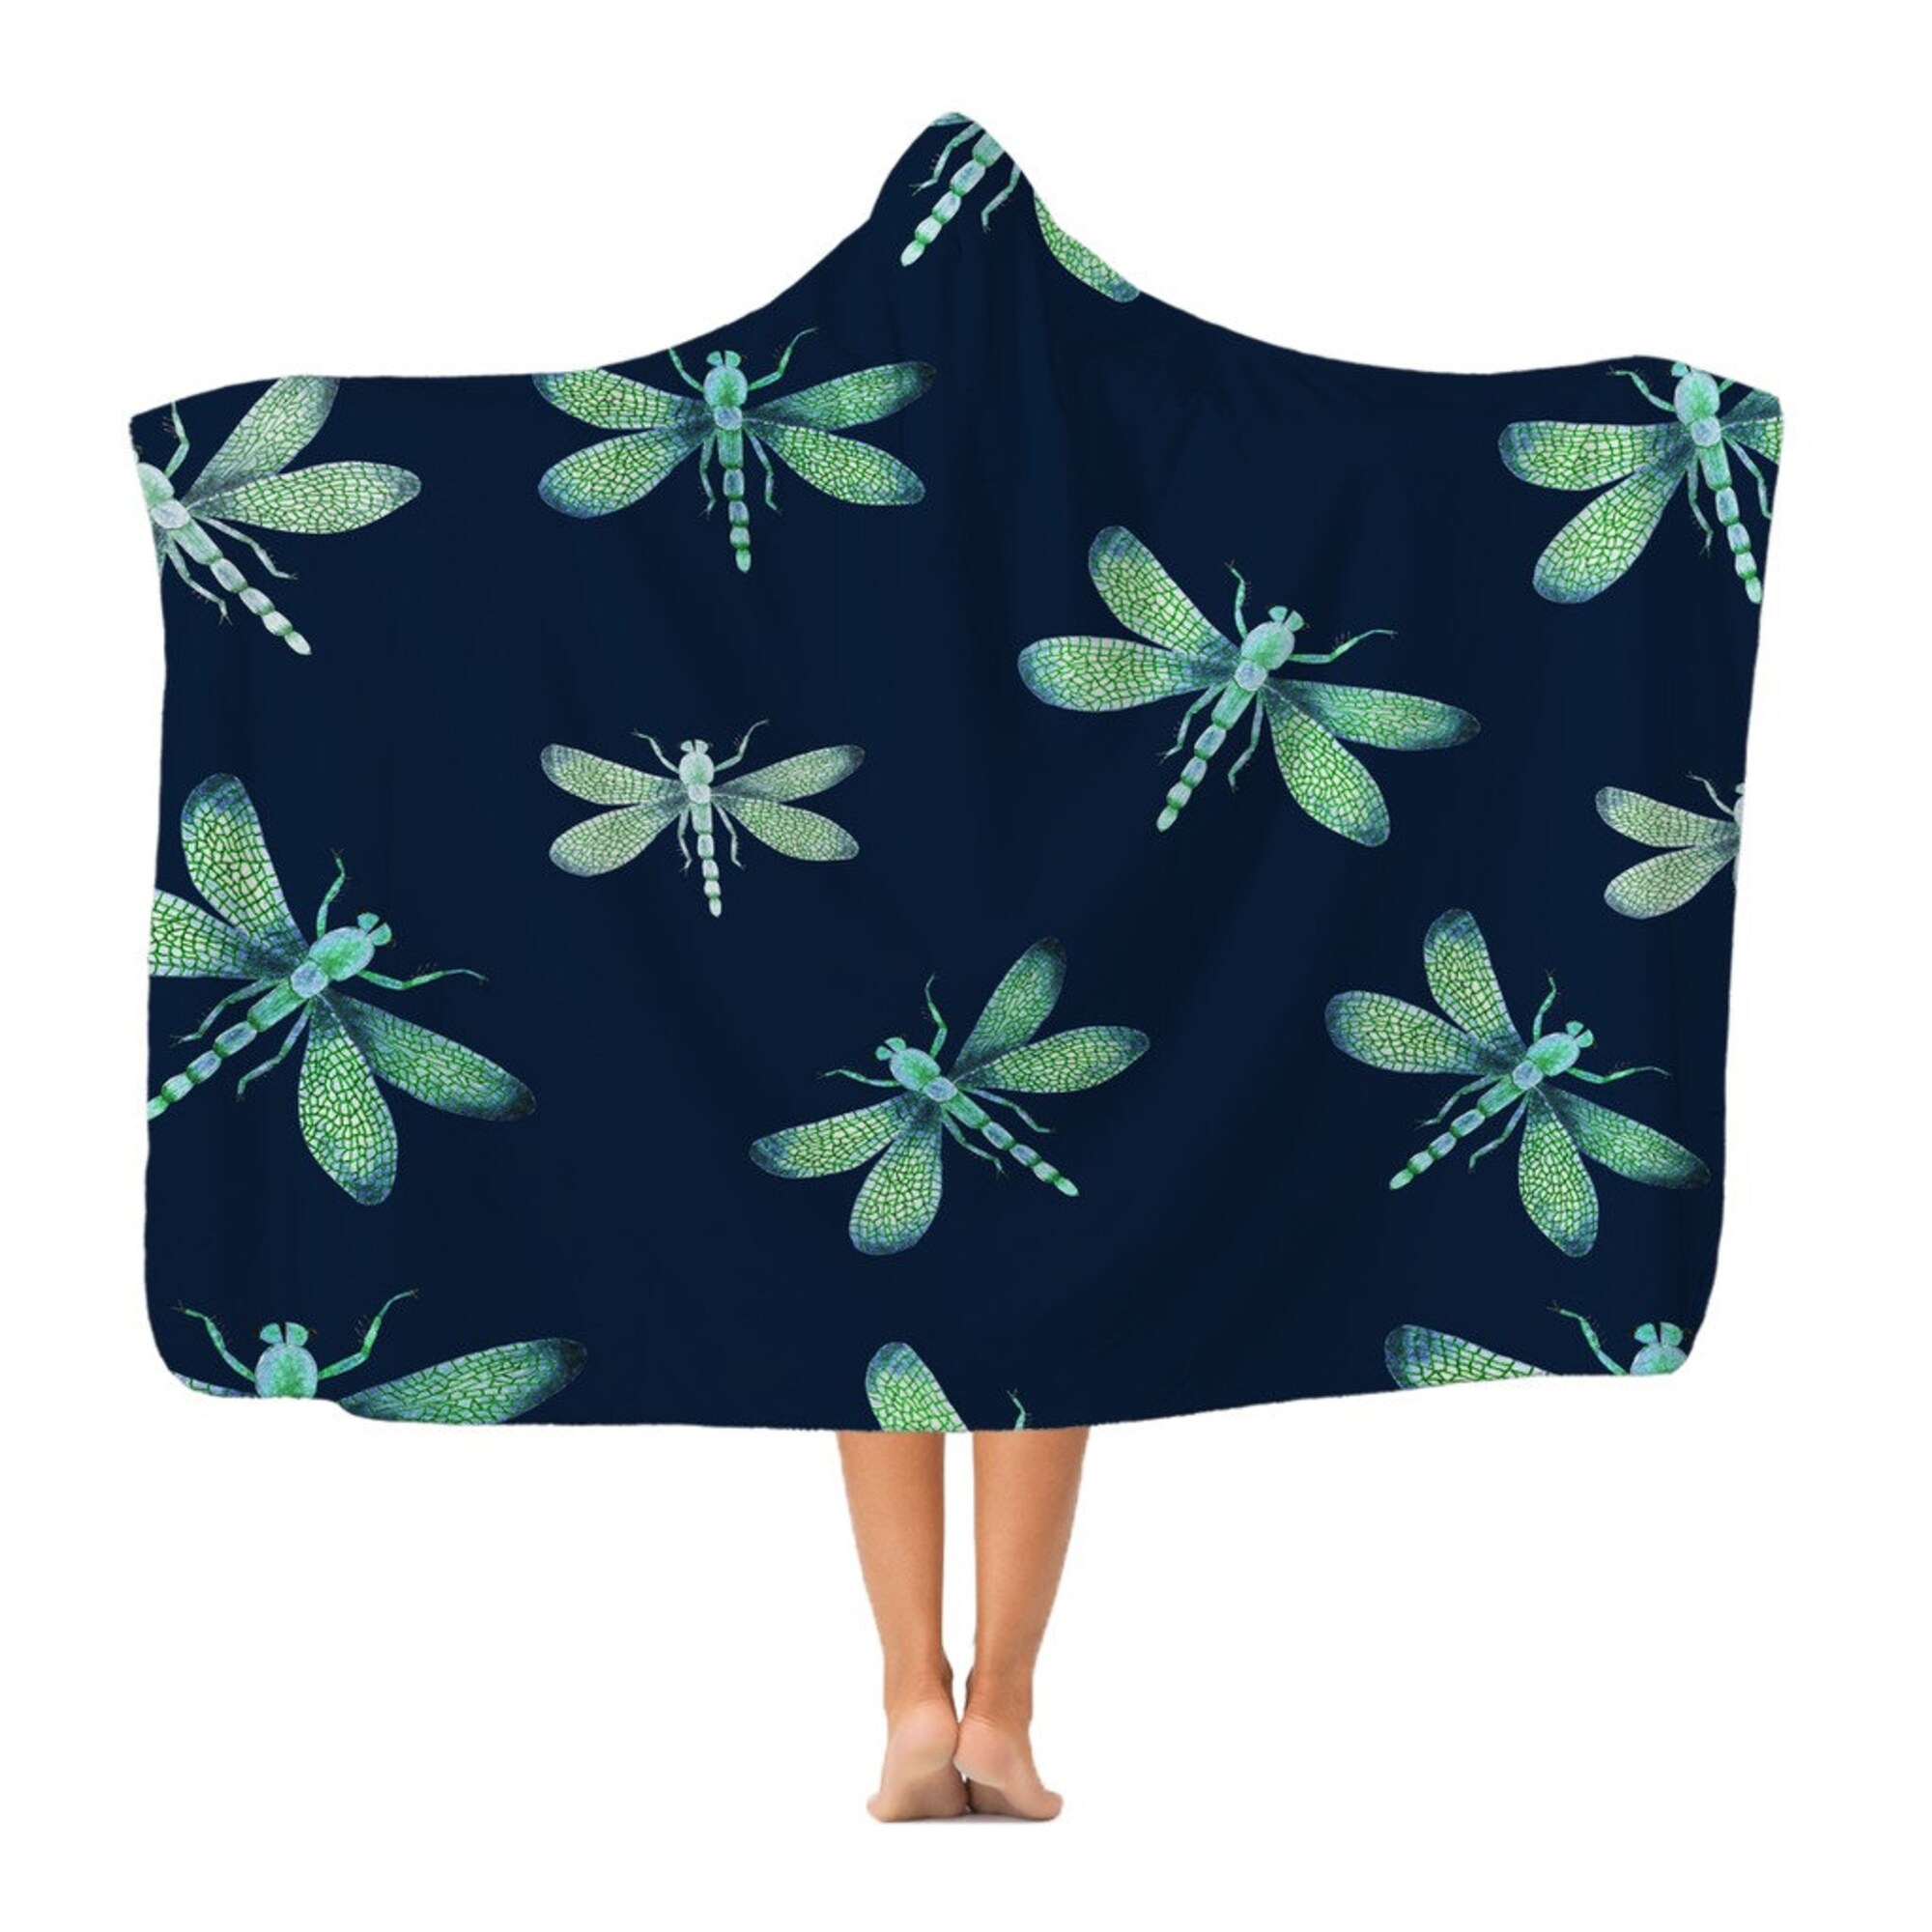 Discover Dragonfly print Premium Adult Hooded Blanket